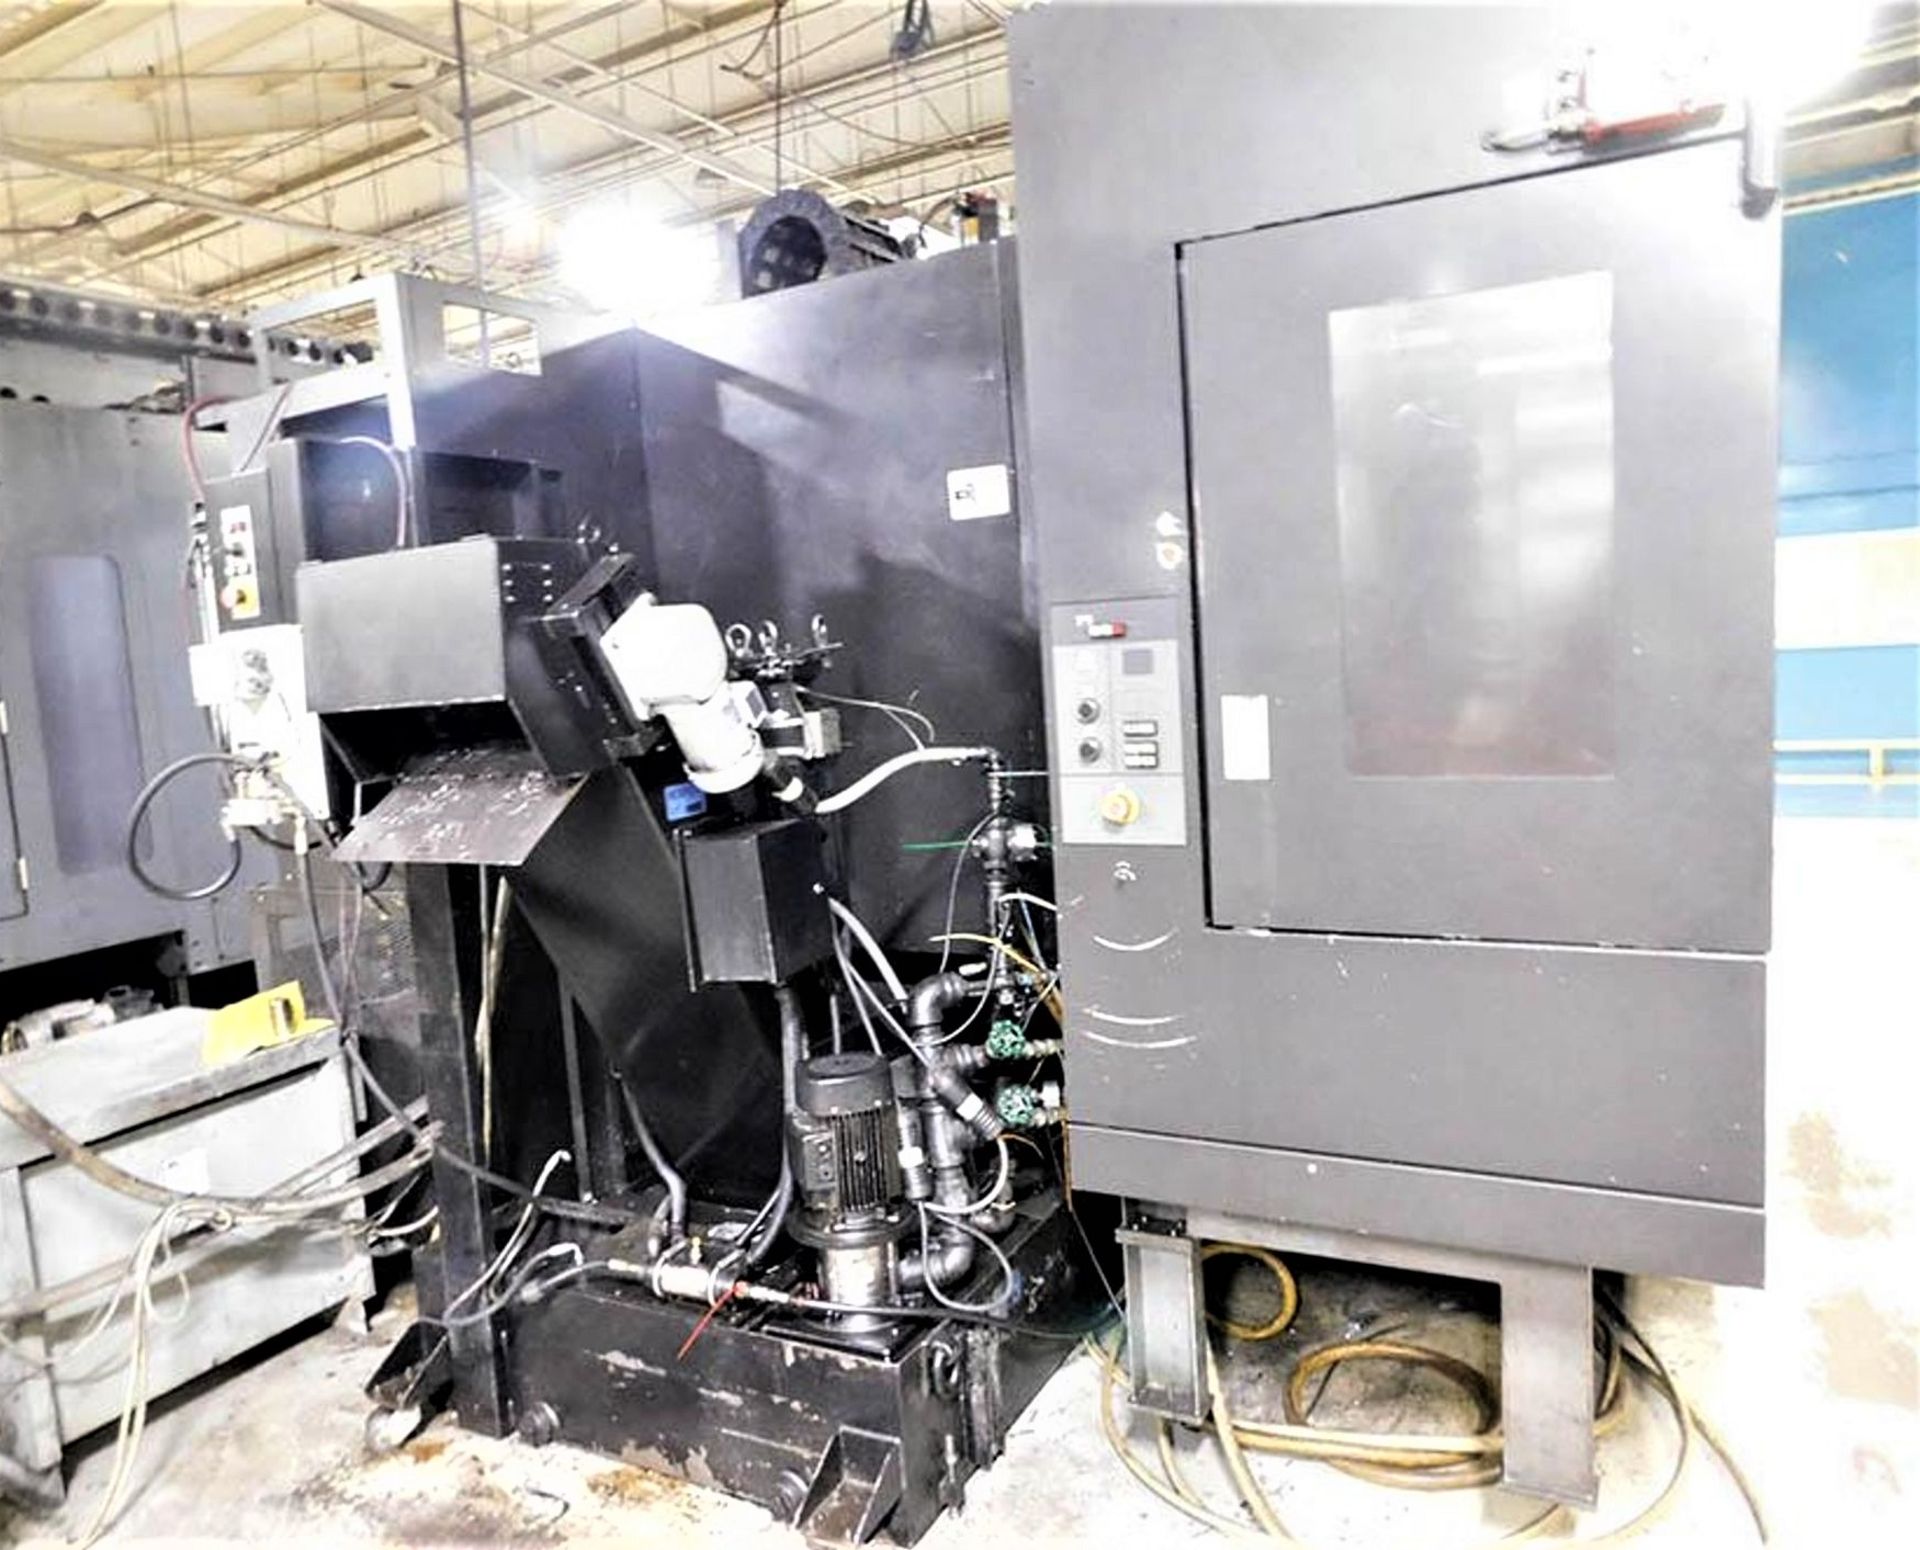 24.8 X 24.8 Pallets Toyoda FH630SX CNC 4-Axis Horizontal Machining Center, S/N NS1429, New 12/2005 - Image 11 of 14